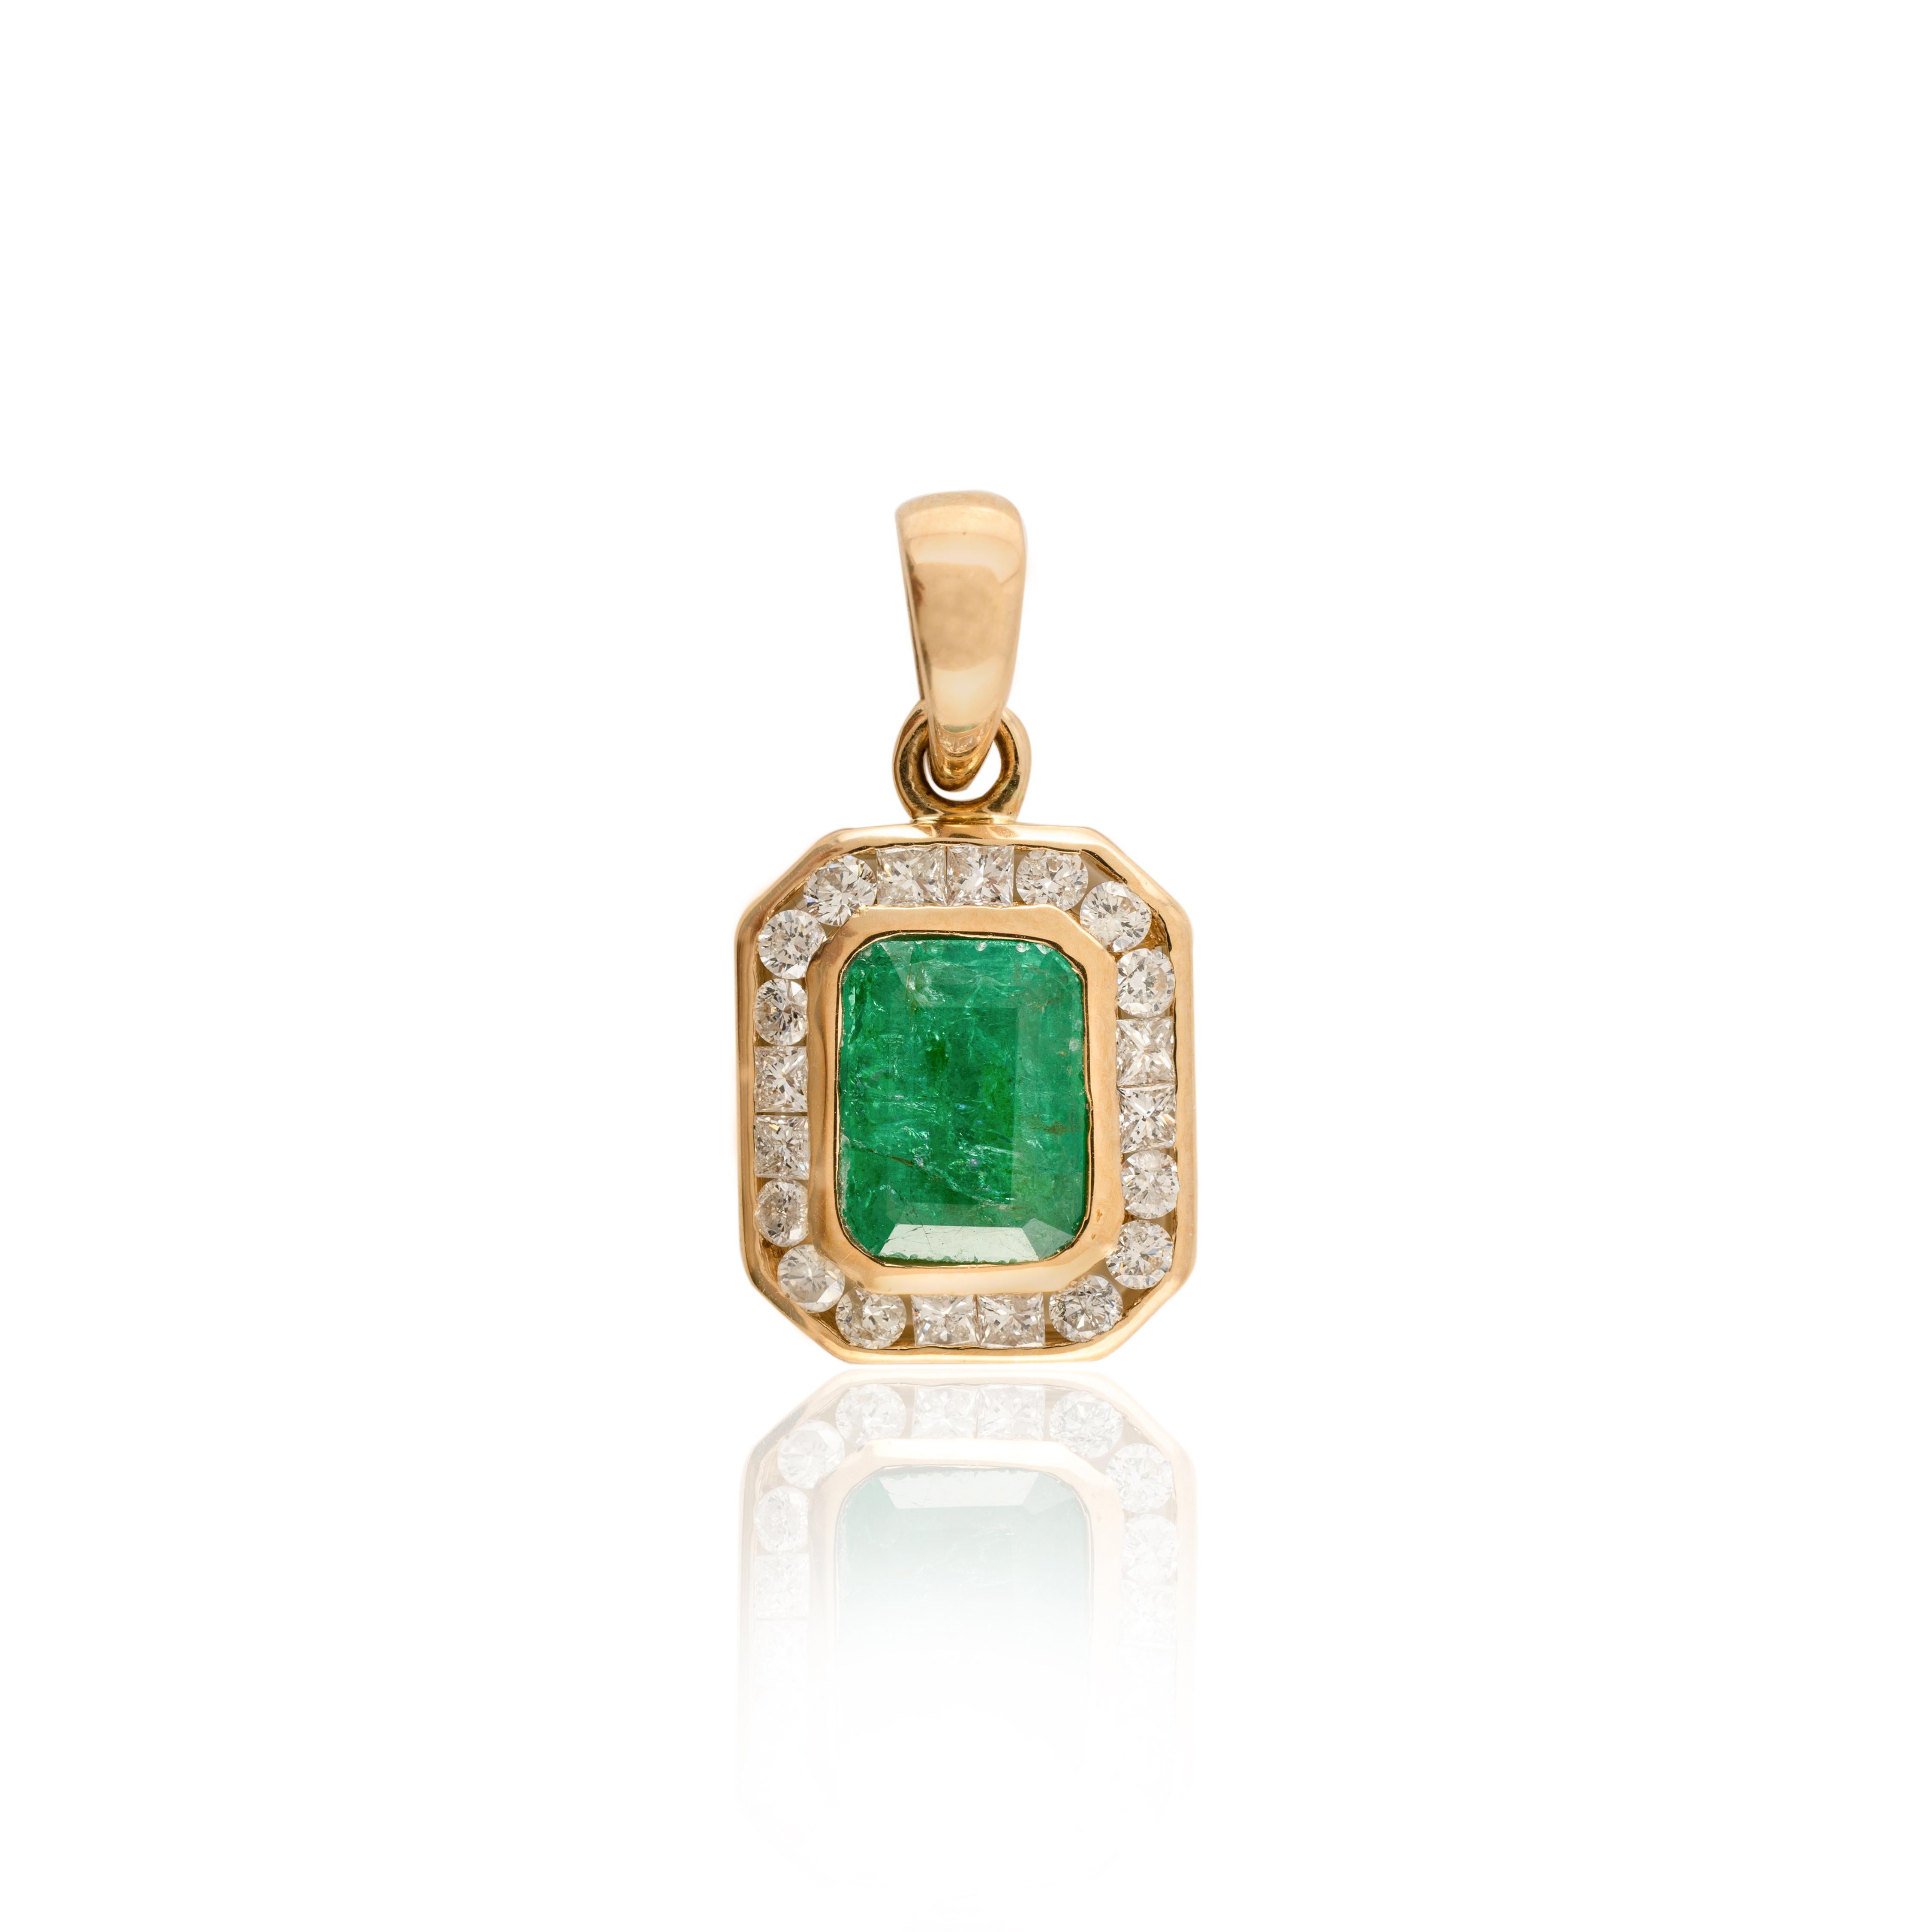 Women's Contemporary Emerald Halo Diamond Pendant 14k Yellow Gold, Christmas Gifts For Sale